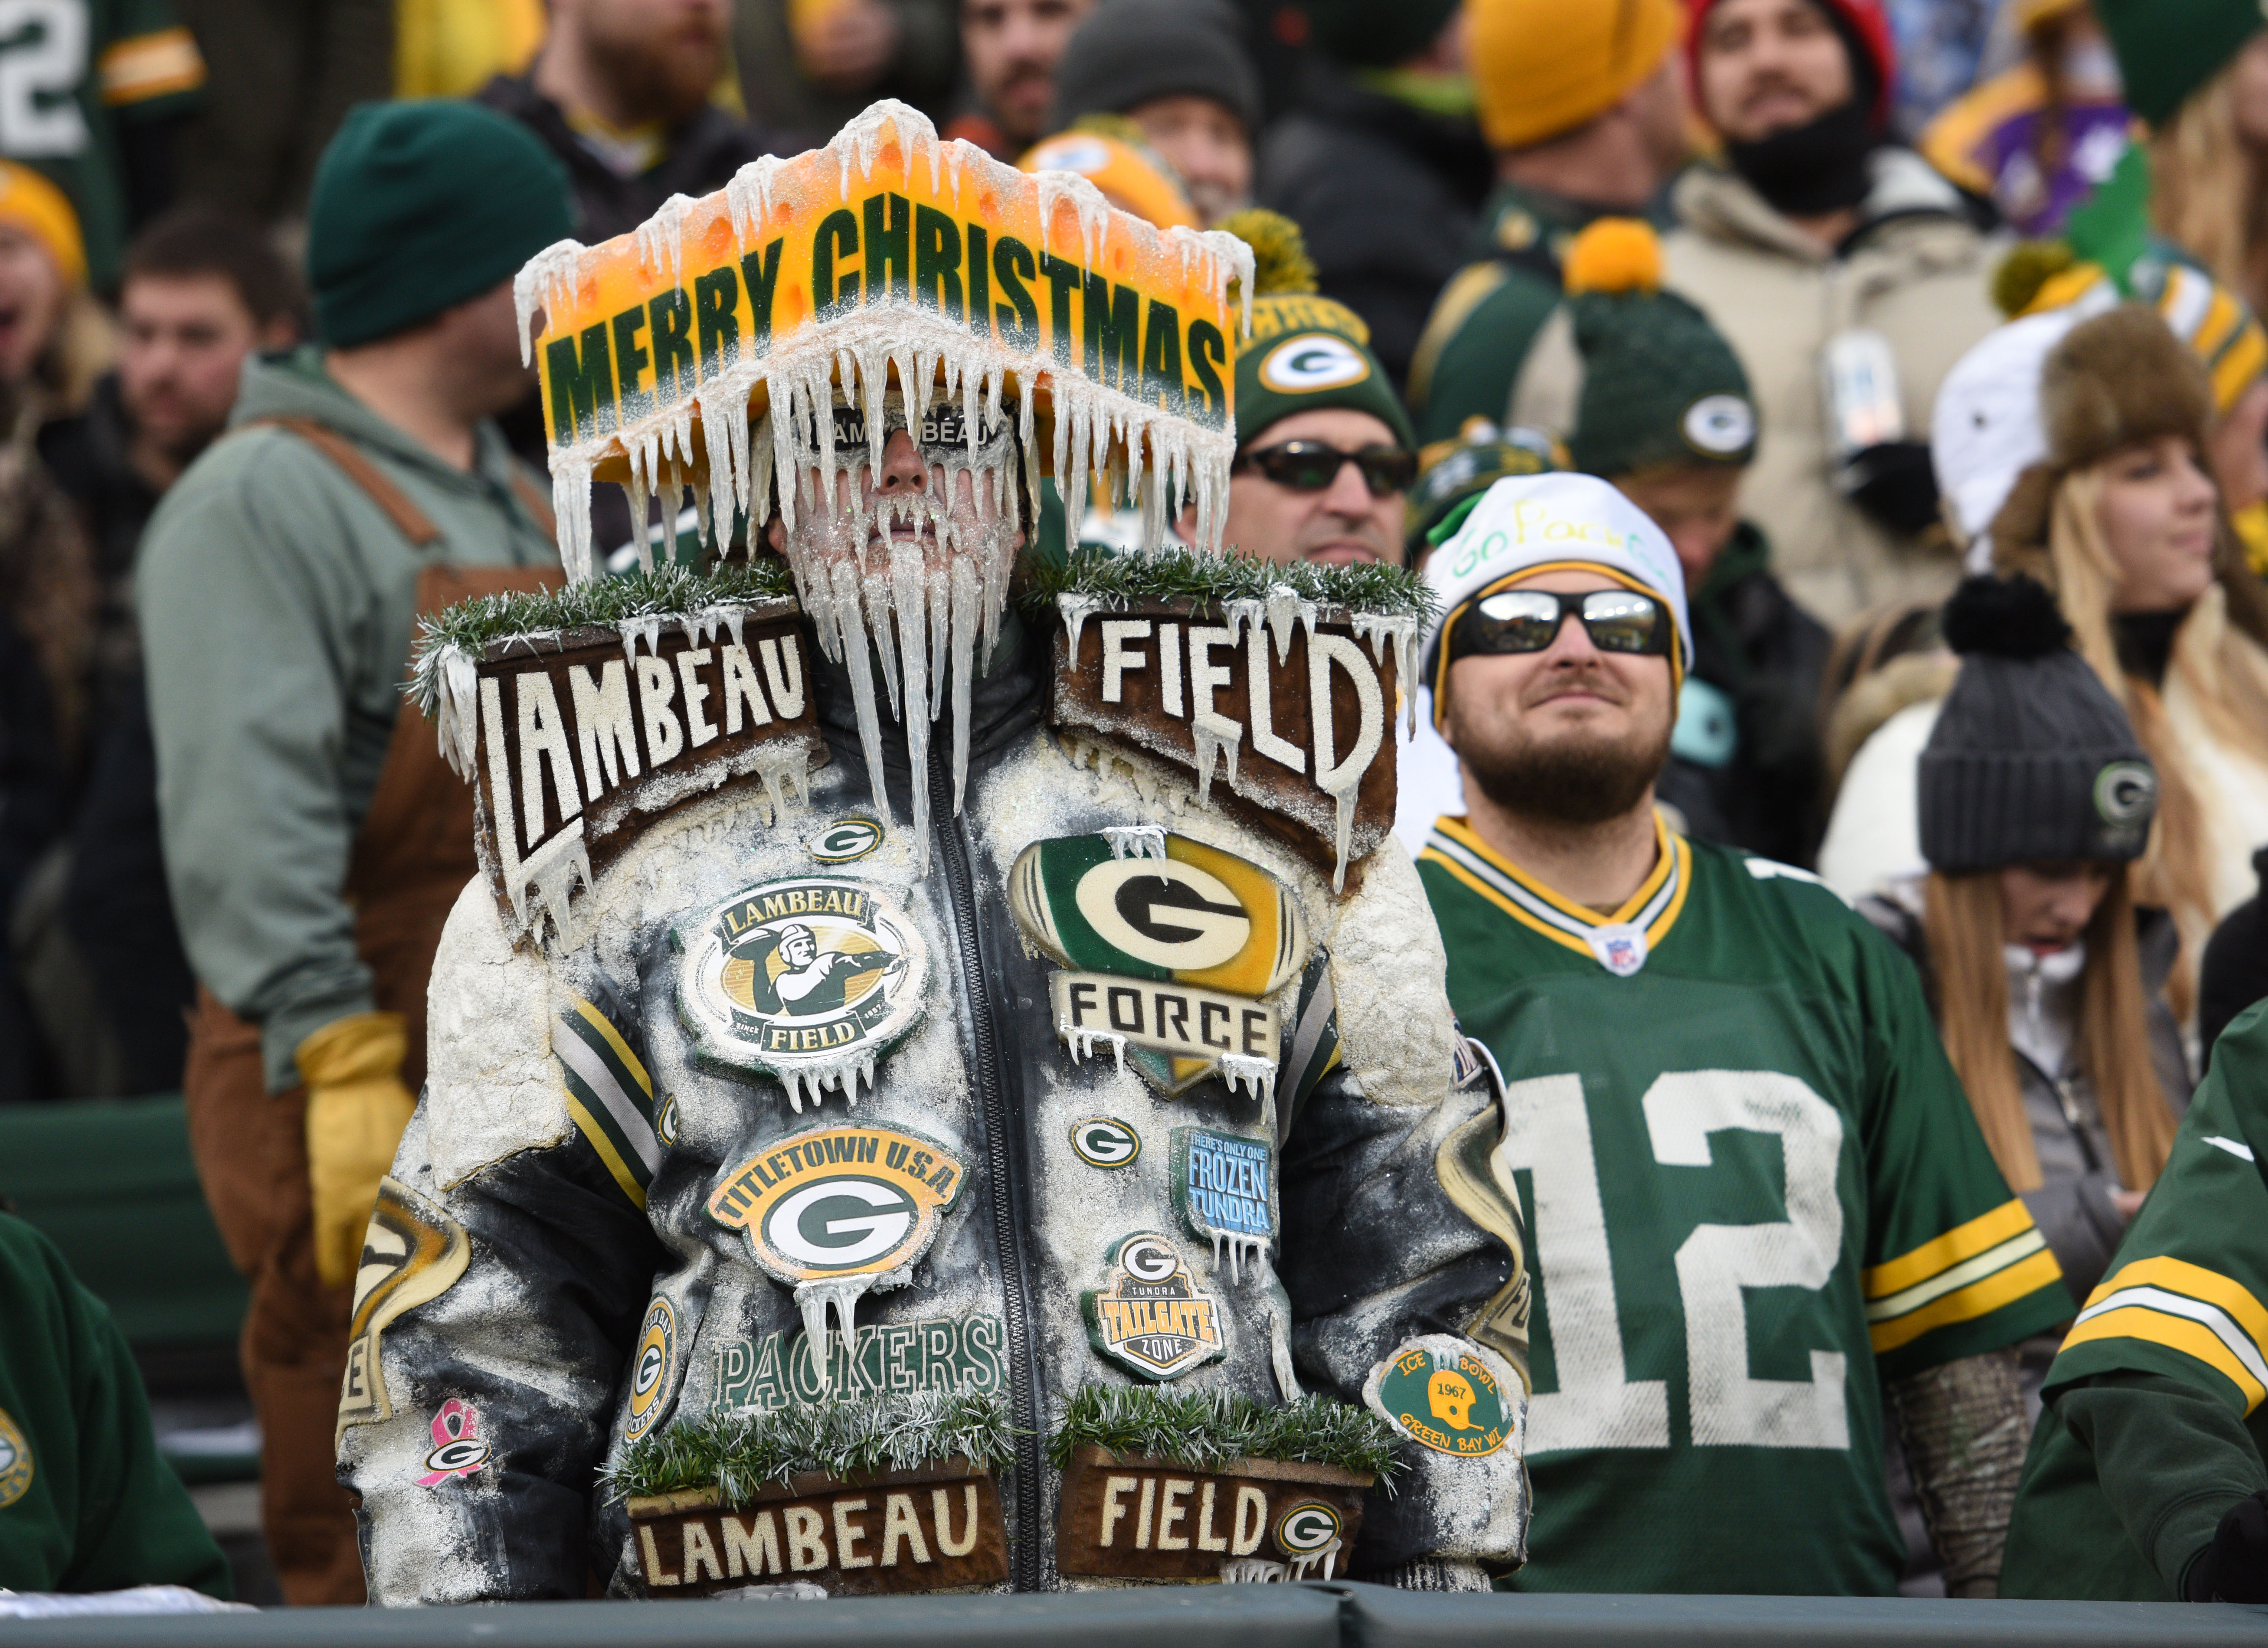 A Green Bay Packer fan displays an icy Christmas greeting during a game against the Minnesota Vikings at Lambeau Field on December 24, 2016 in Green Bay, Wisconsin.